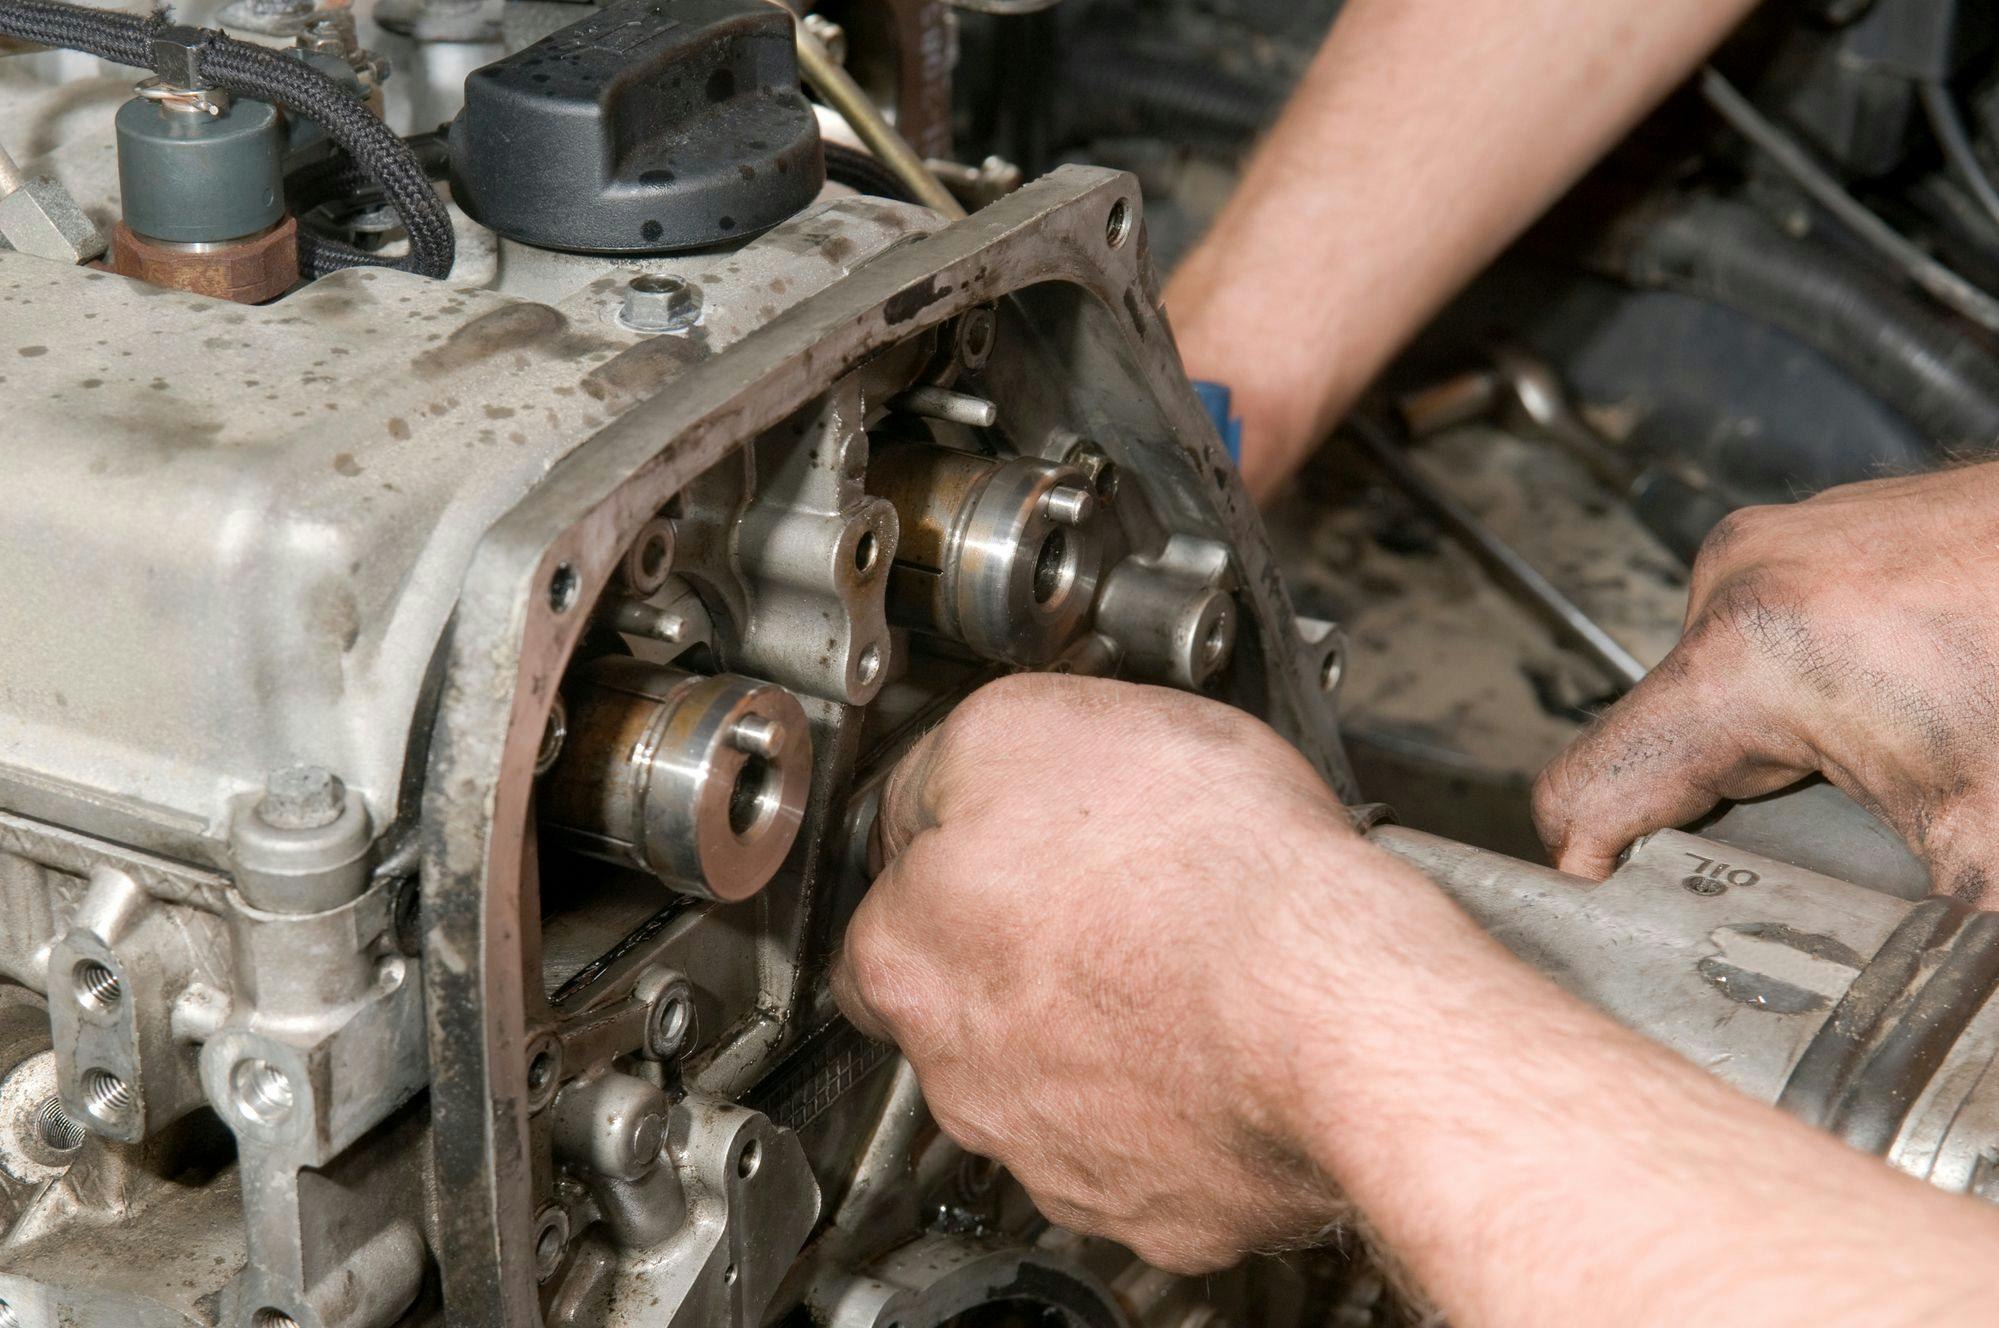 Join our DIY diesel repair series to gain insights into engine maintenance and troubleshooting. Ignite your passion, learn from experts, and keep rolling!